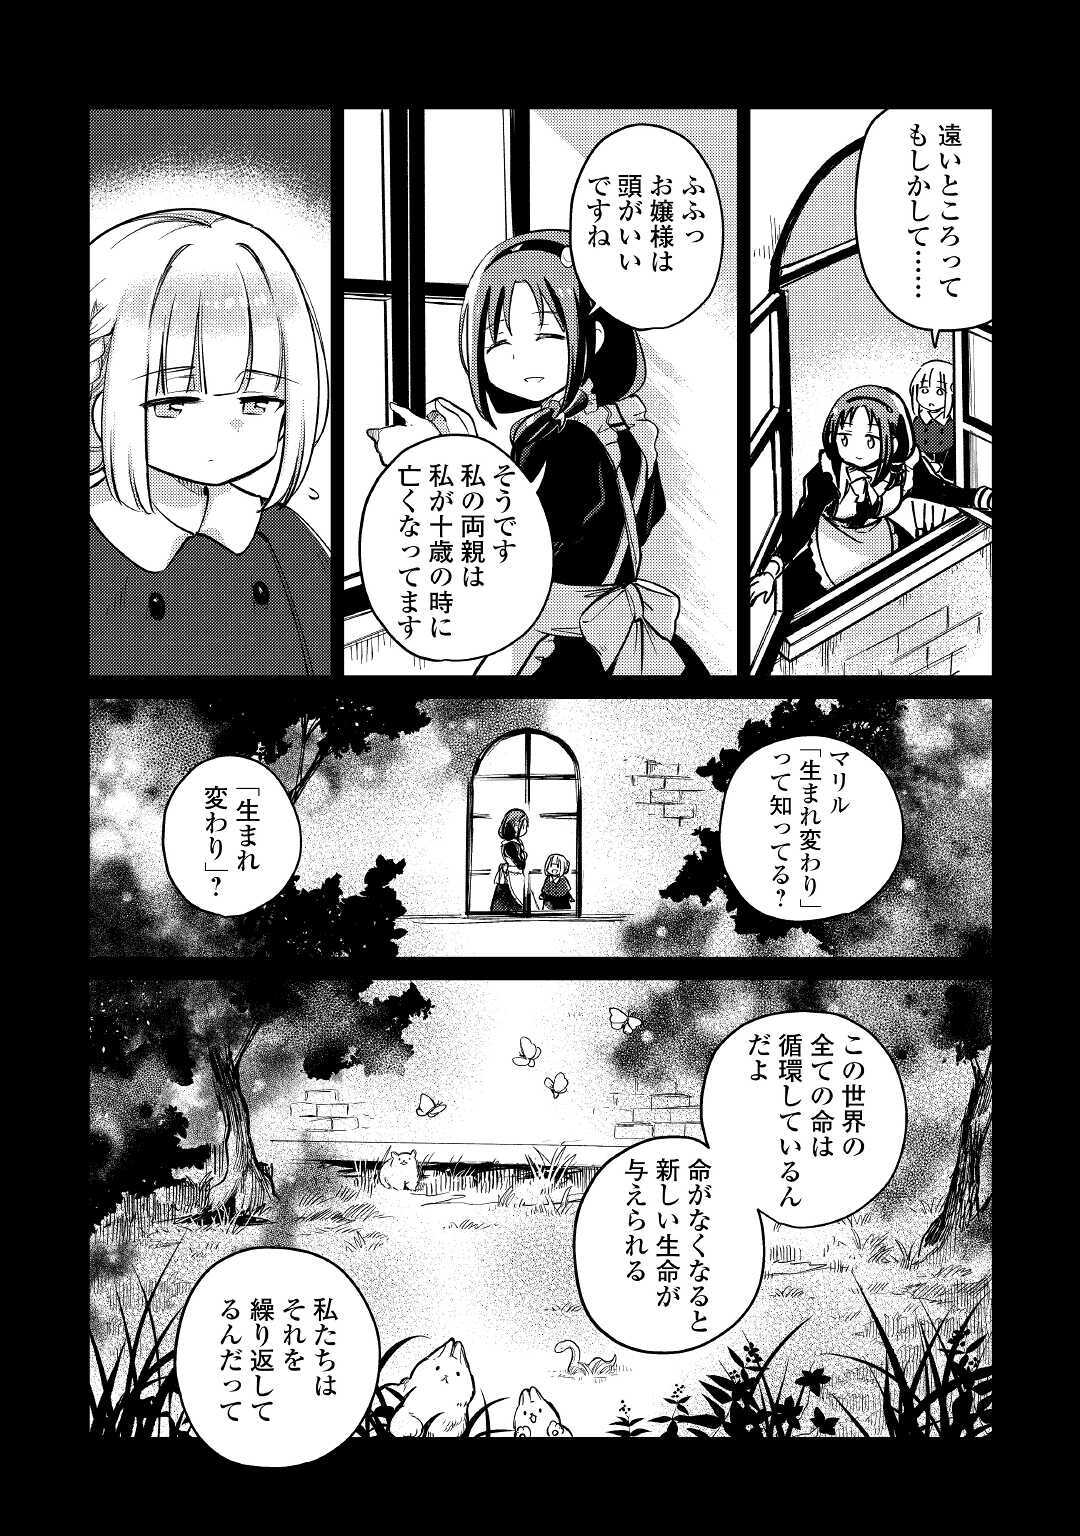 The Former Structural Researcher’s Story of Otherworldly Adventure 第33話 - Page 4